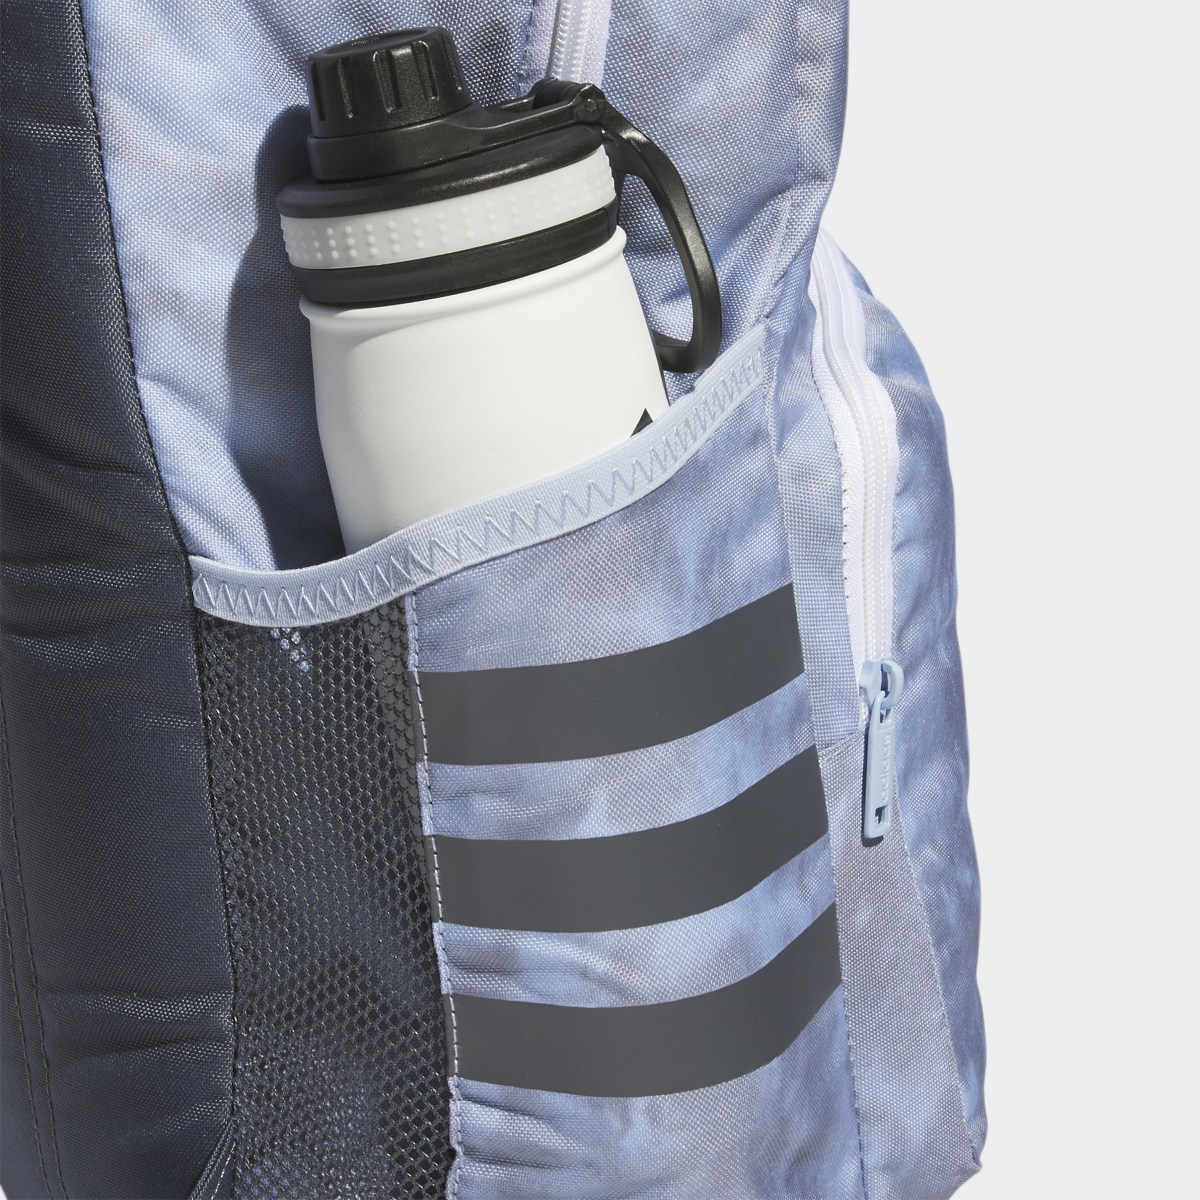 Adidas Classic 3-Stripes Backpack. 7